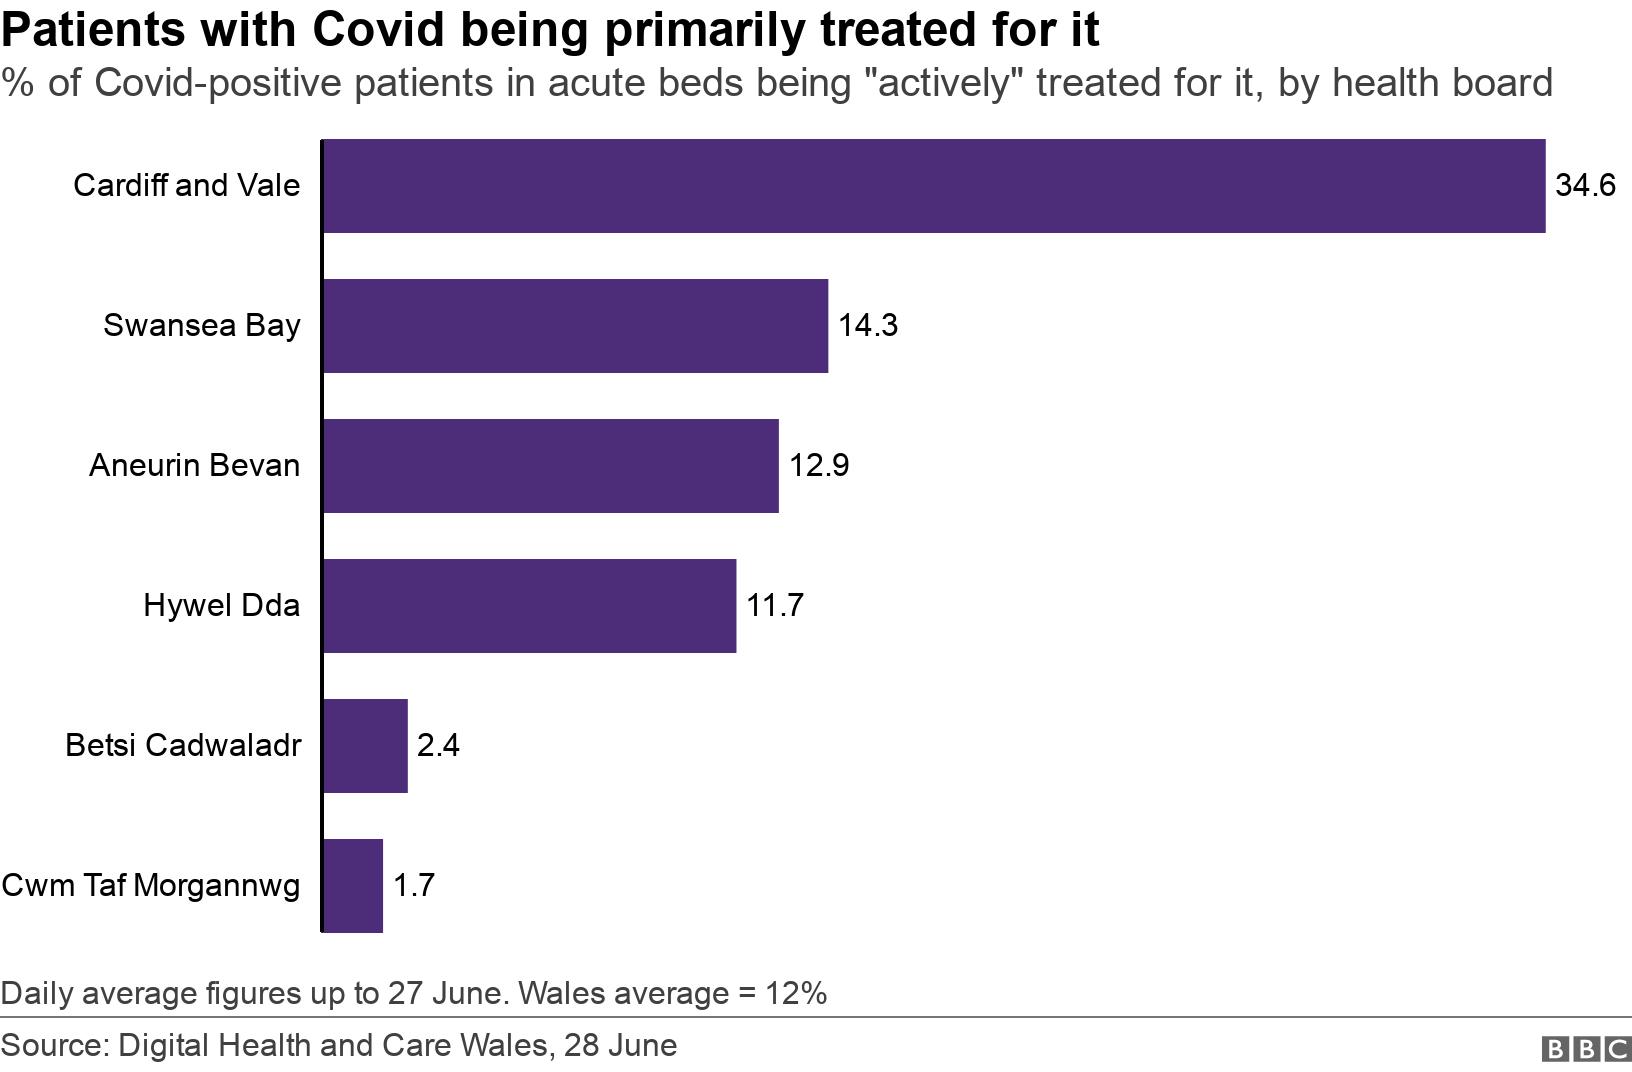 Patients with Covid being primarily treated for it. % of Covid-positive patients in acute beds being "actively" treated for it, by health board.  Daily average figures up to 27 June. Wales average = 12%.